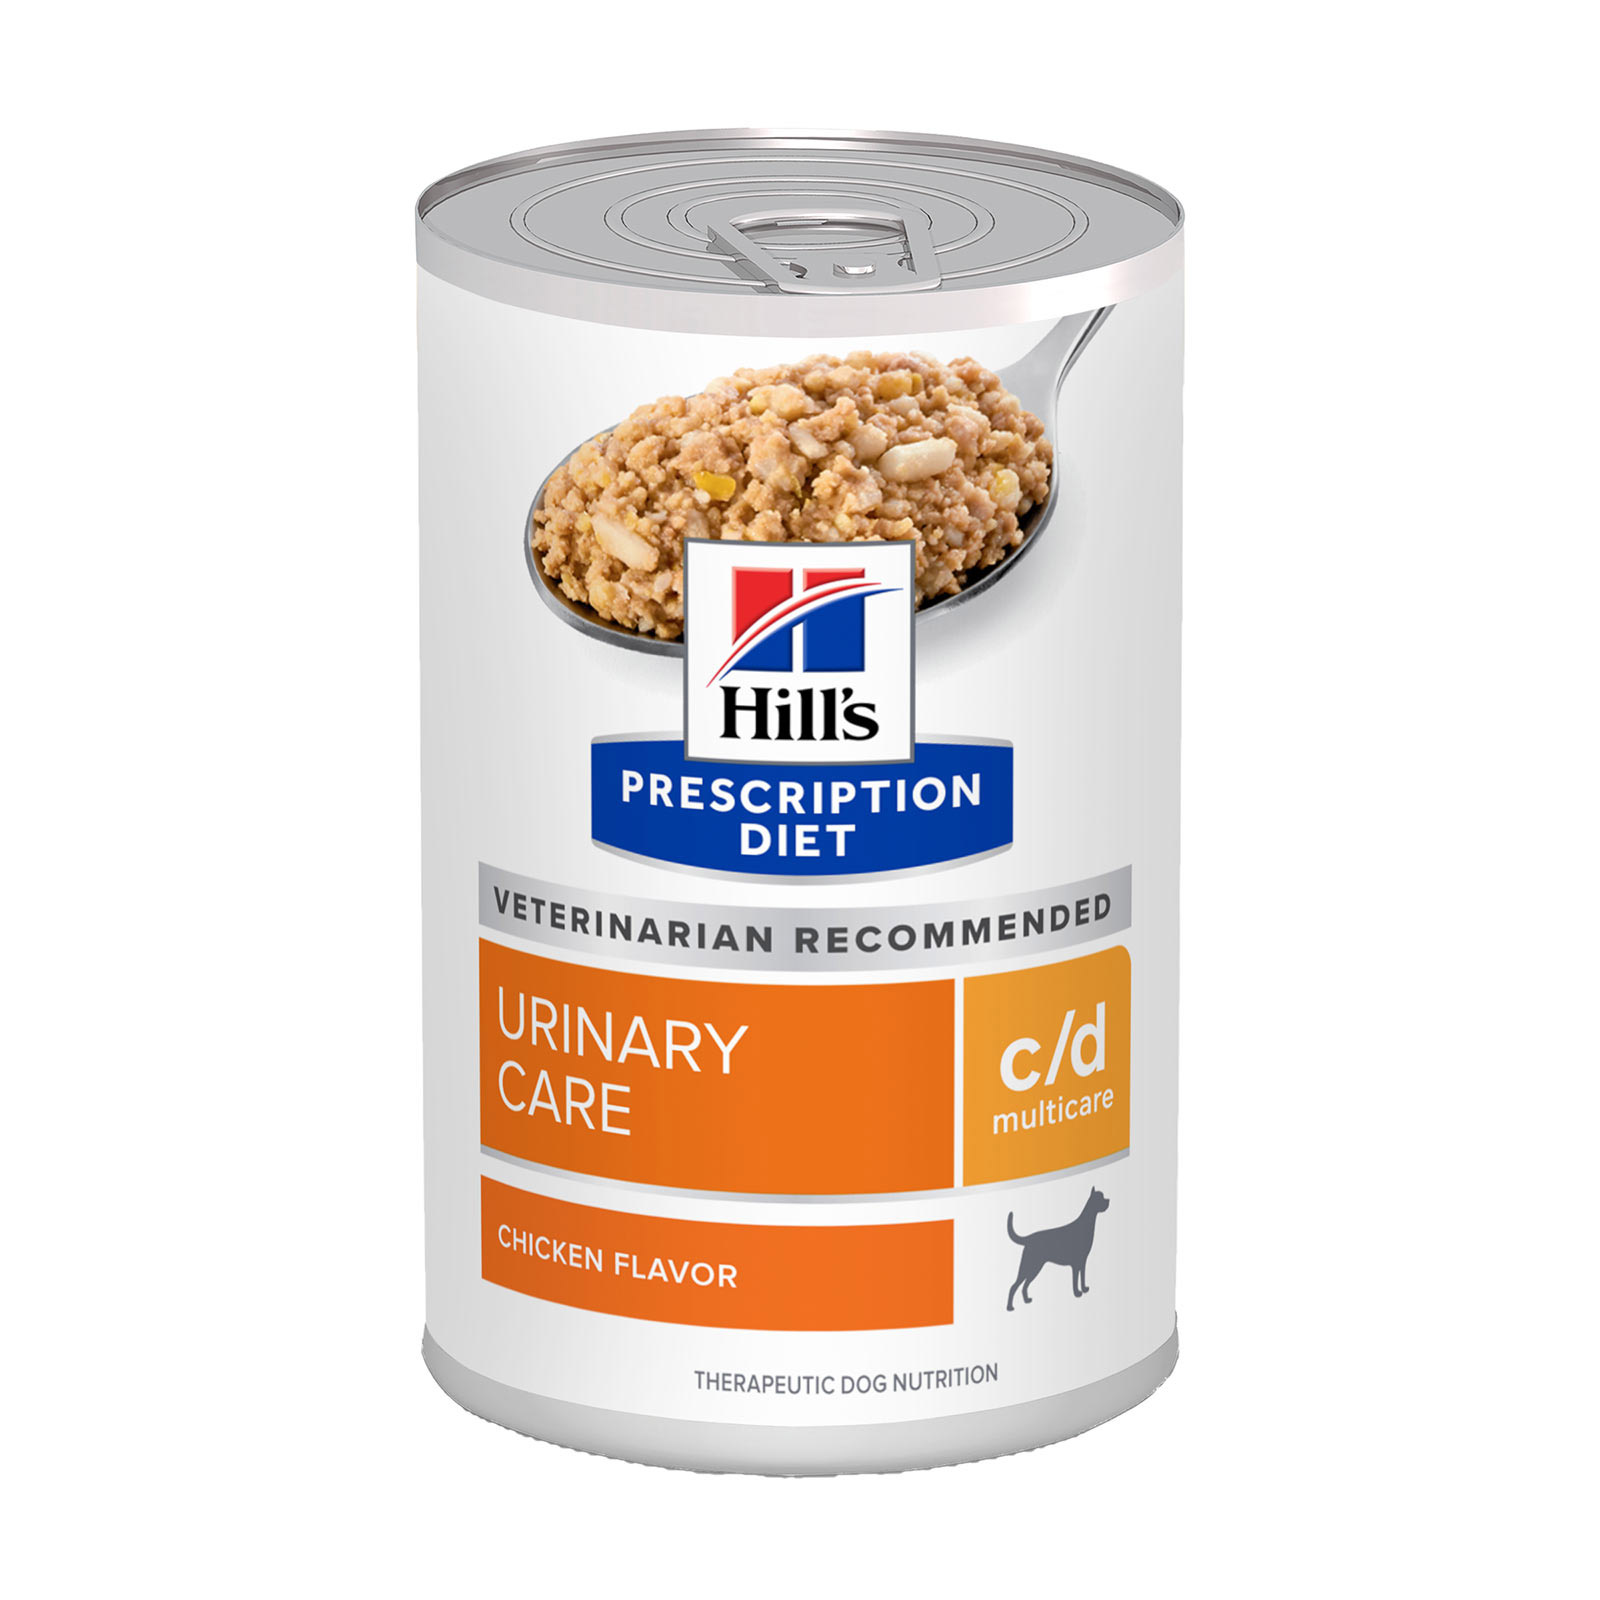 Hill's Prescription Diet c/d Multicare Urinary Care Canned Dog Food 370gm